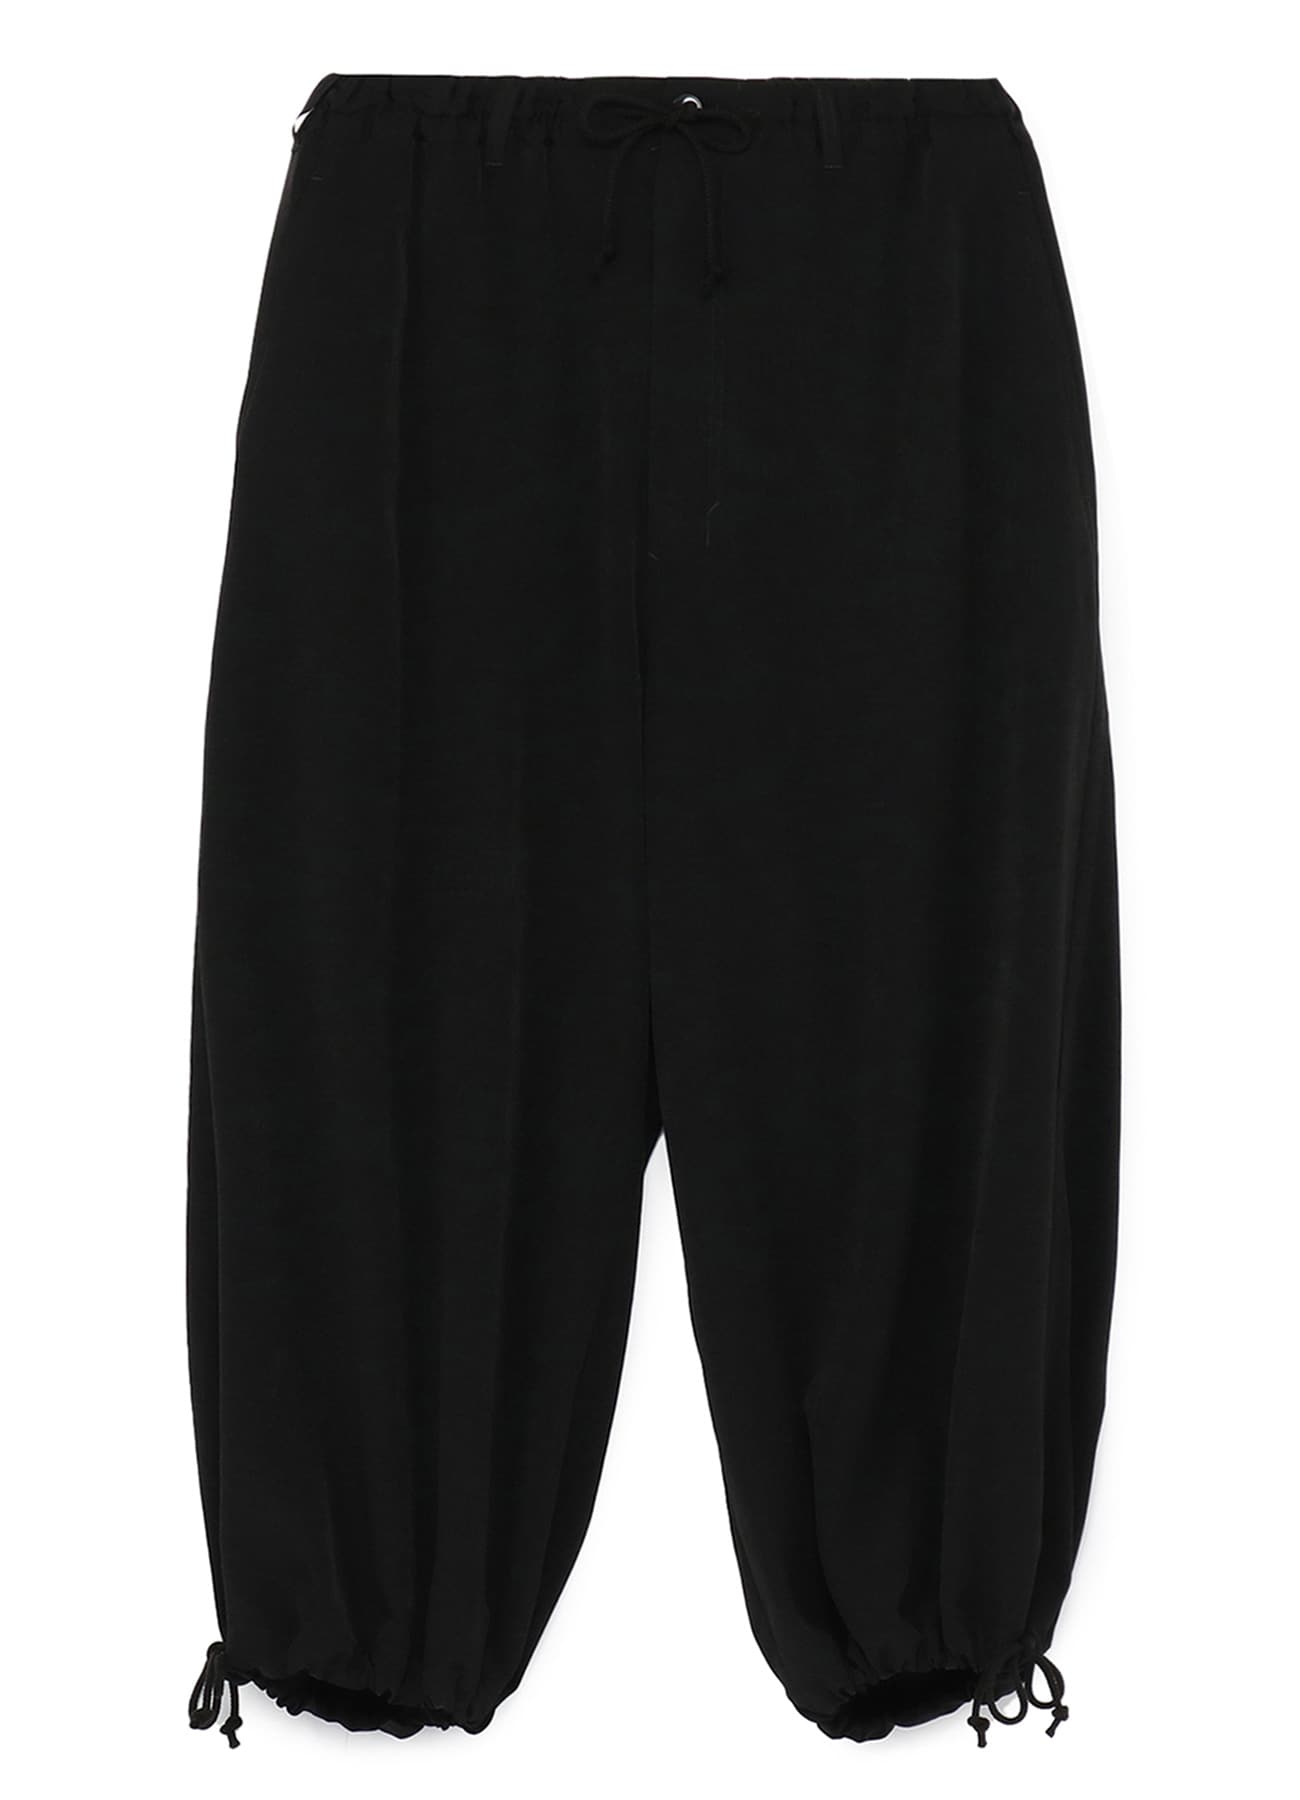 T / A Vintage Decyne Easy Balloon Pants (M Black): GroundY ｜ THE 